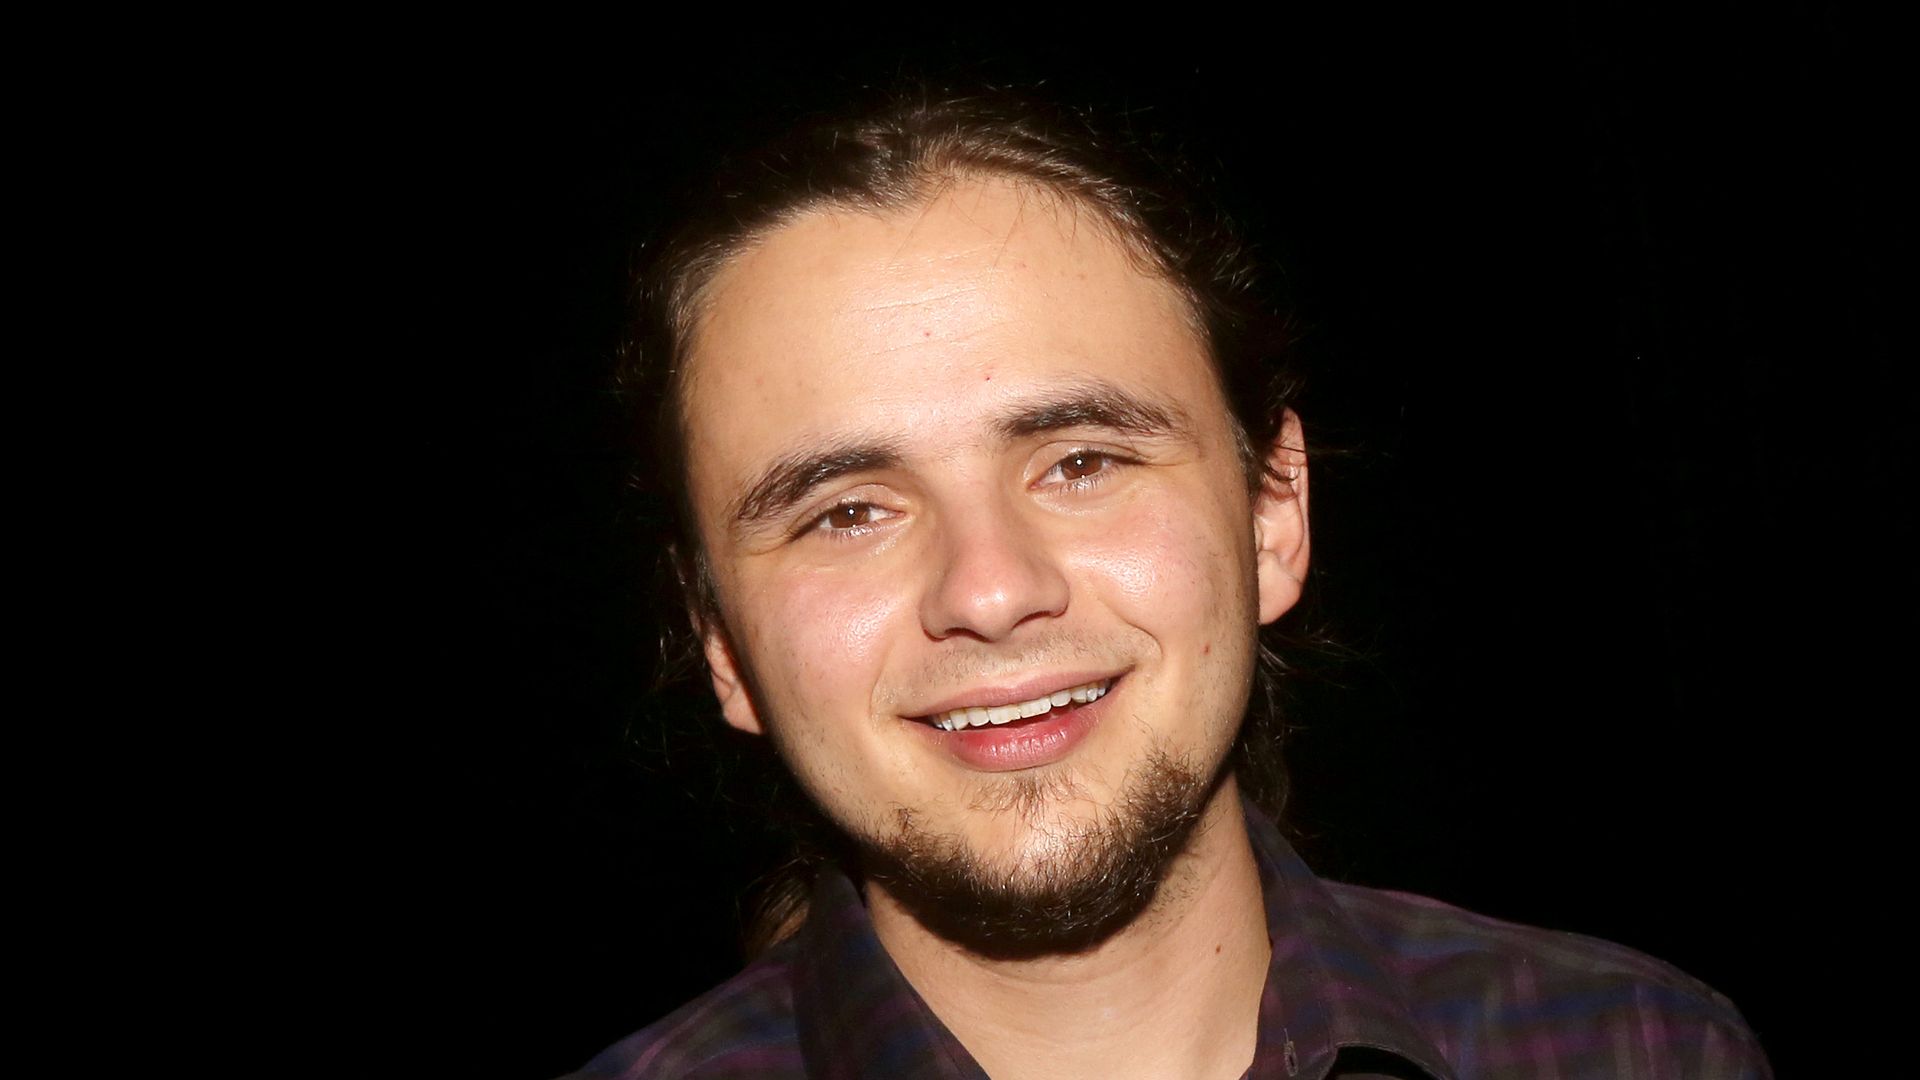 Prince Jackson attends a preview performance of the new Michael Jackson musical âMJâ on Broadway at The Neil Simon Theater on December 11, 2021 in New York City. The highly anticipated Michael Jackson musical has played to sold out houses in its first week and has its opening night on February 1, 2022.